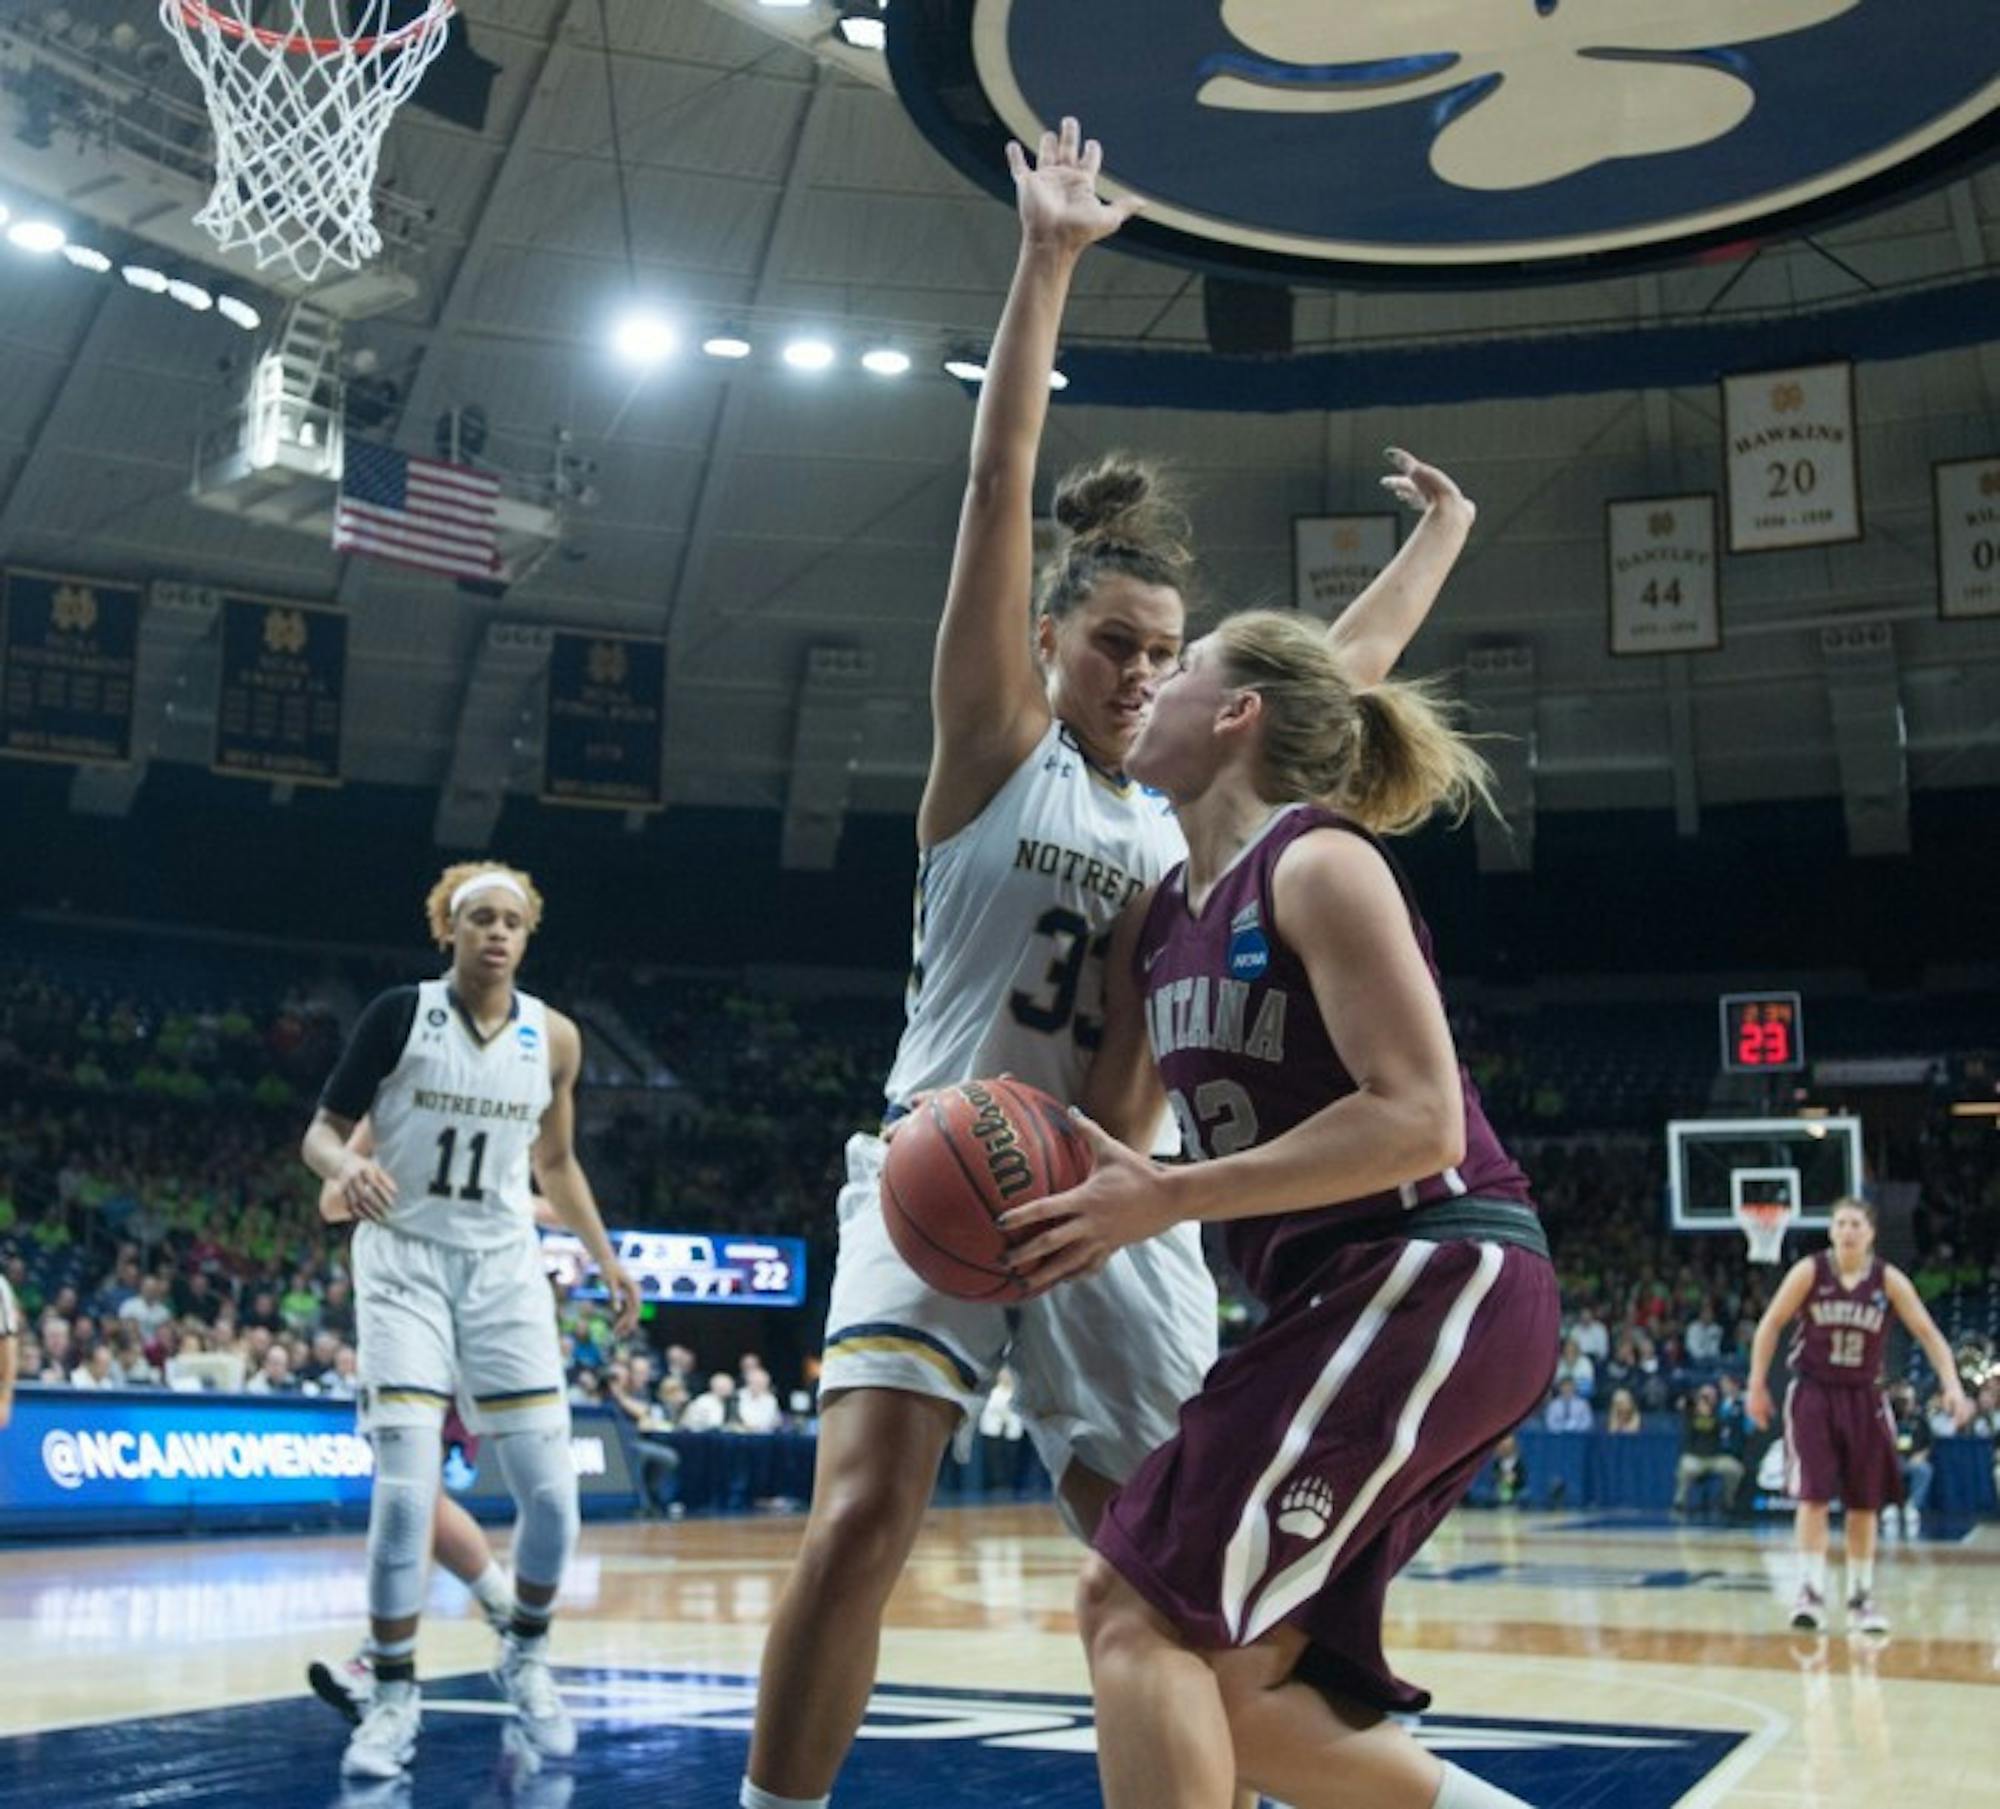 Irish freshman forward Kathryn Westbeld plays defense during Notre Dame’s 77-43 win over Montana on Friday.